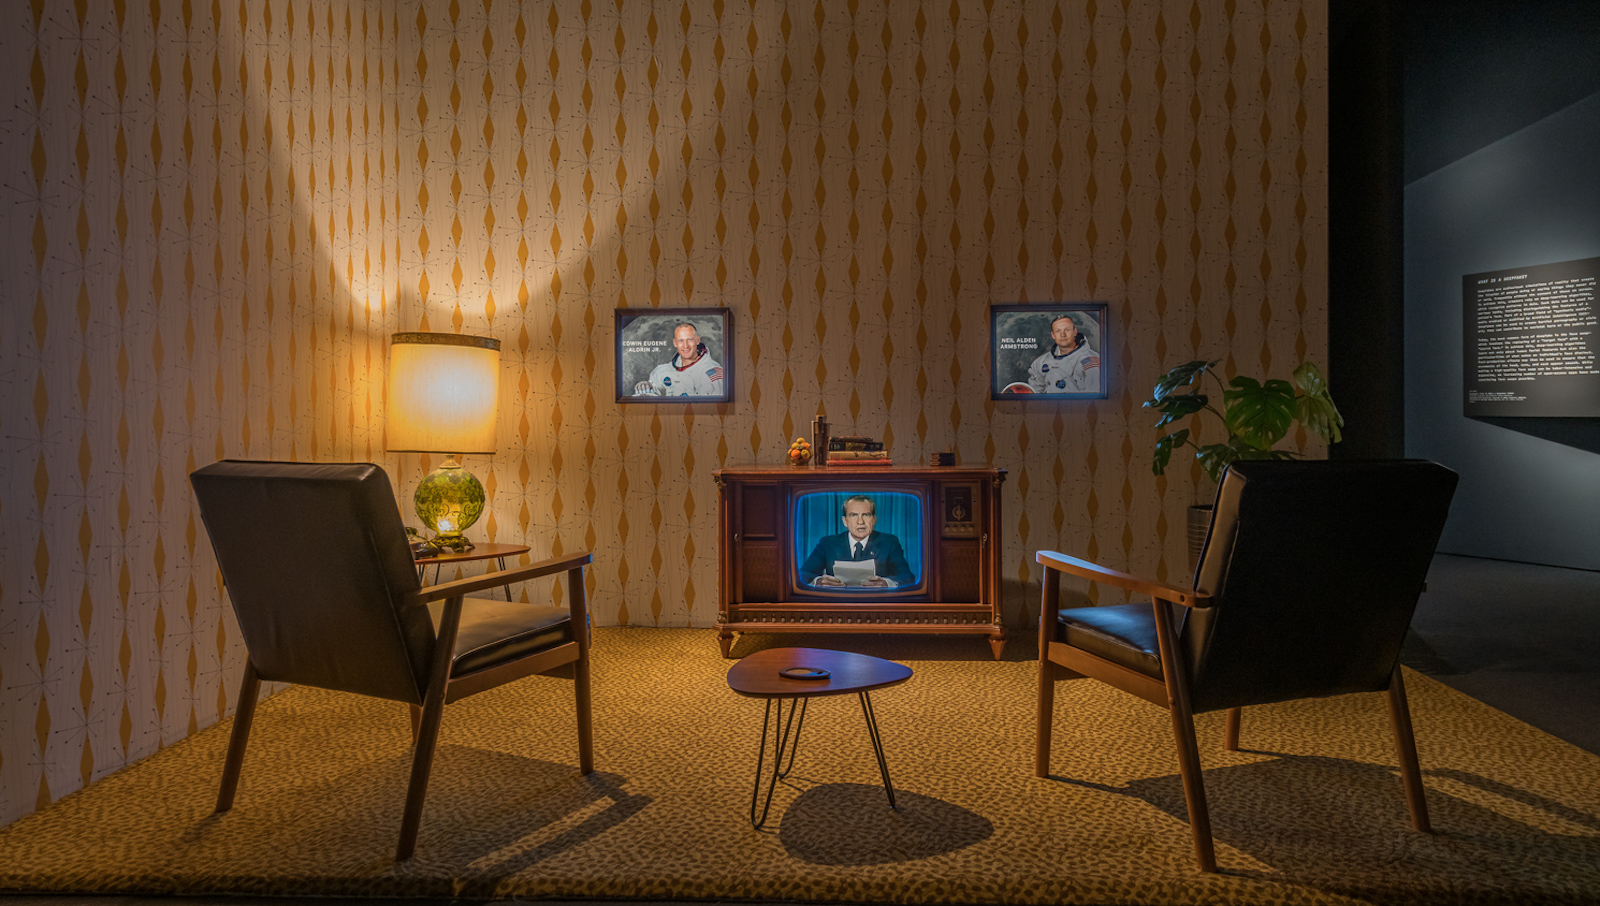 An exhibition mockup of a living room, with two chairs facing a television showing an image of President Nixon giving an address.